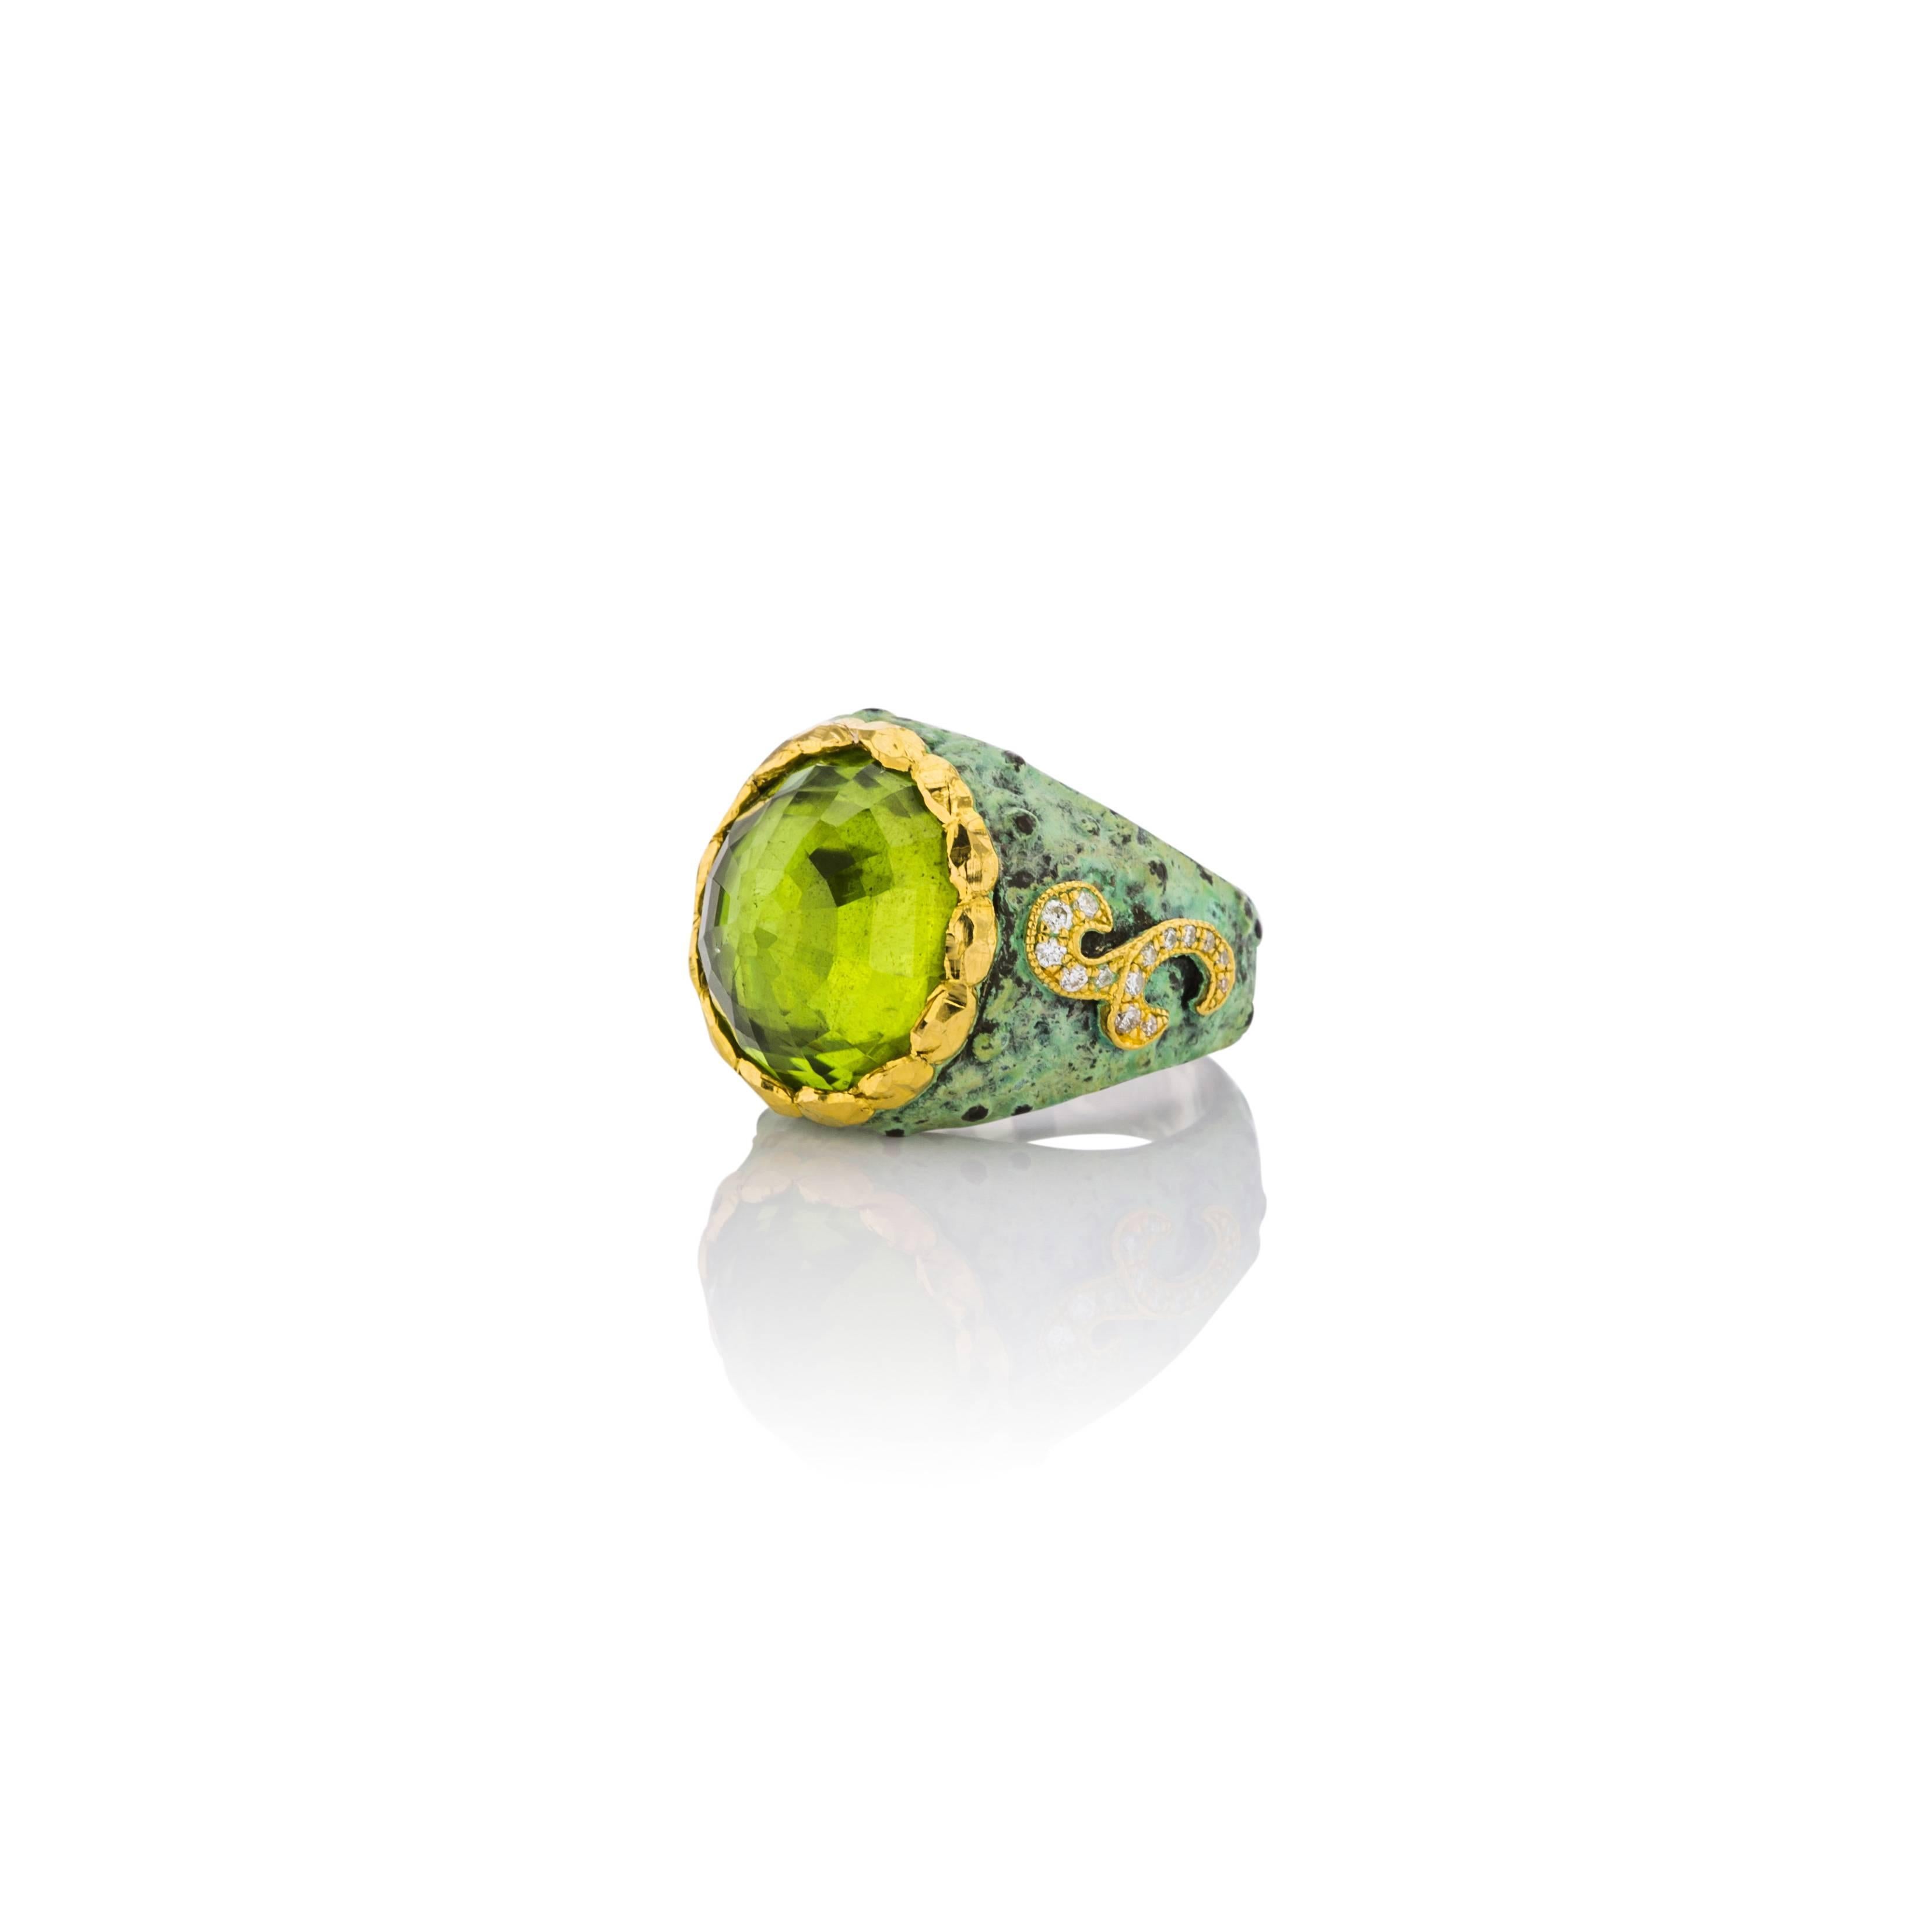 This ring by Victor Velyan has a 14ct. Peridot with 28 Diamonds that equal .21cts.  24K Gold Accents on Sterling Silver complete this look.   
This ring features Victor's classic patina work in green.  Truly a work of art, the Gold on the sides of